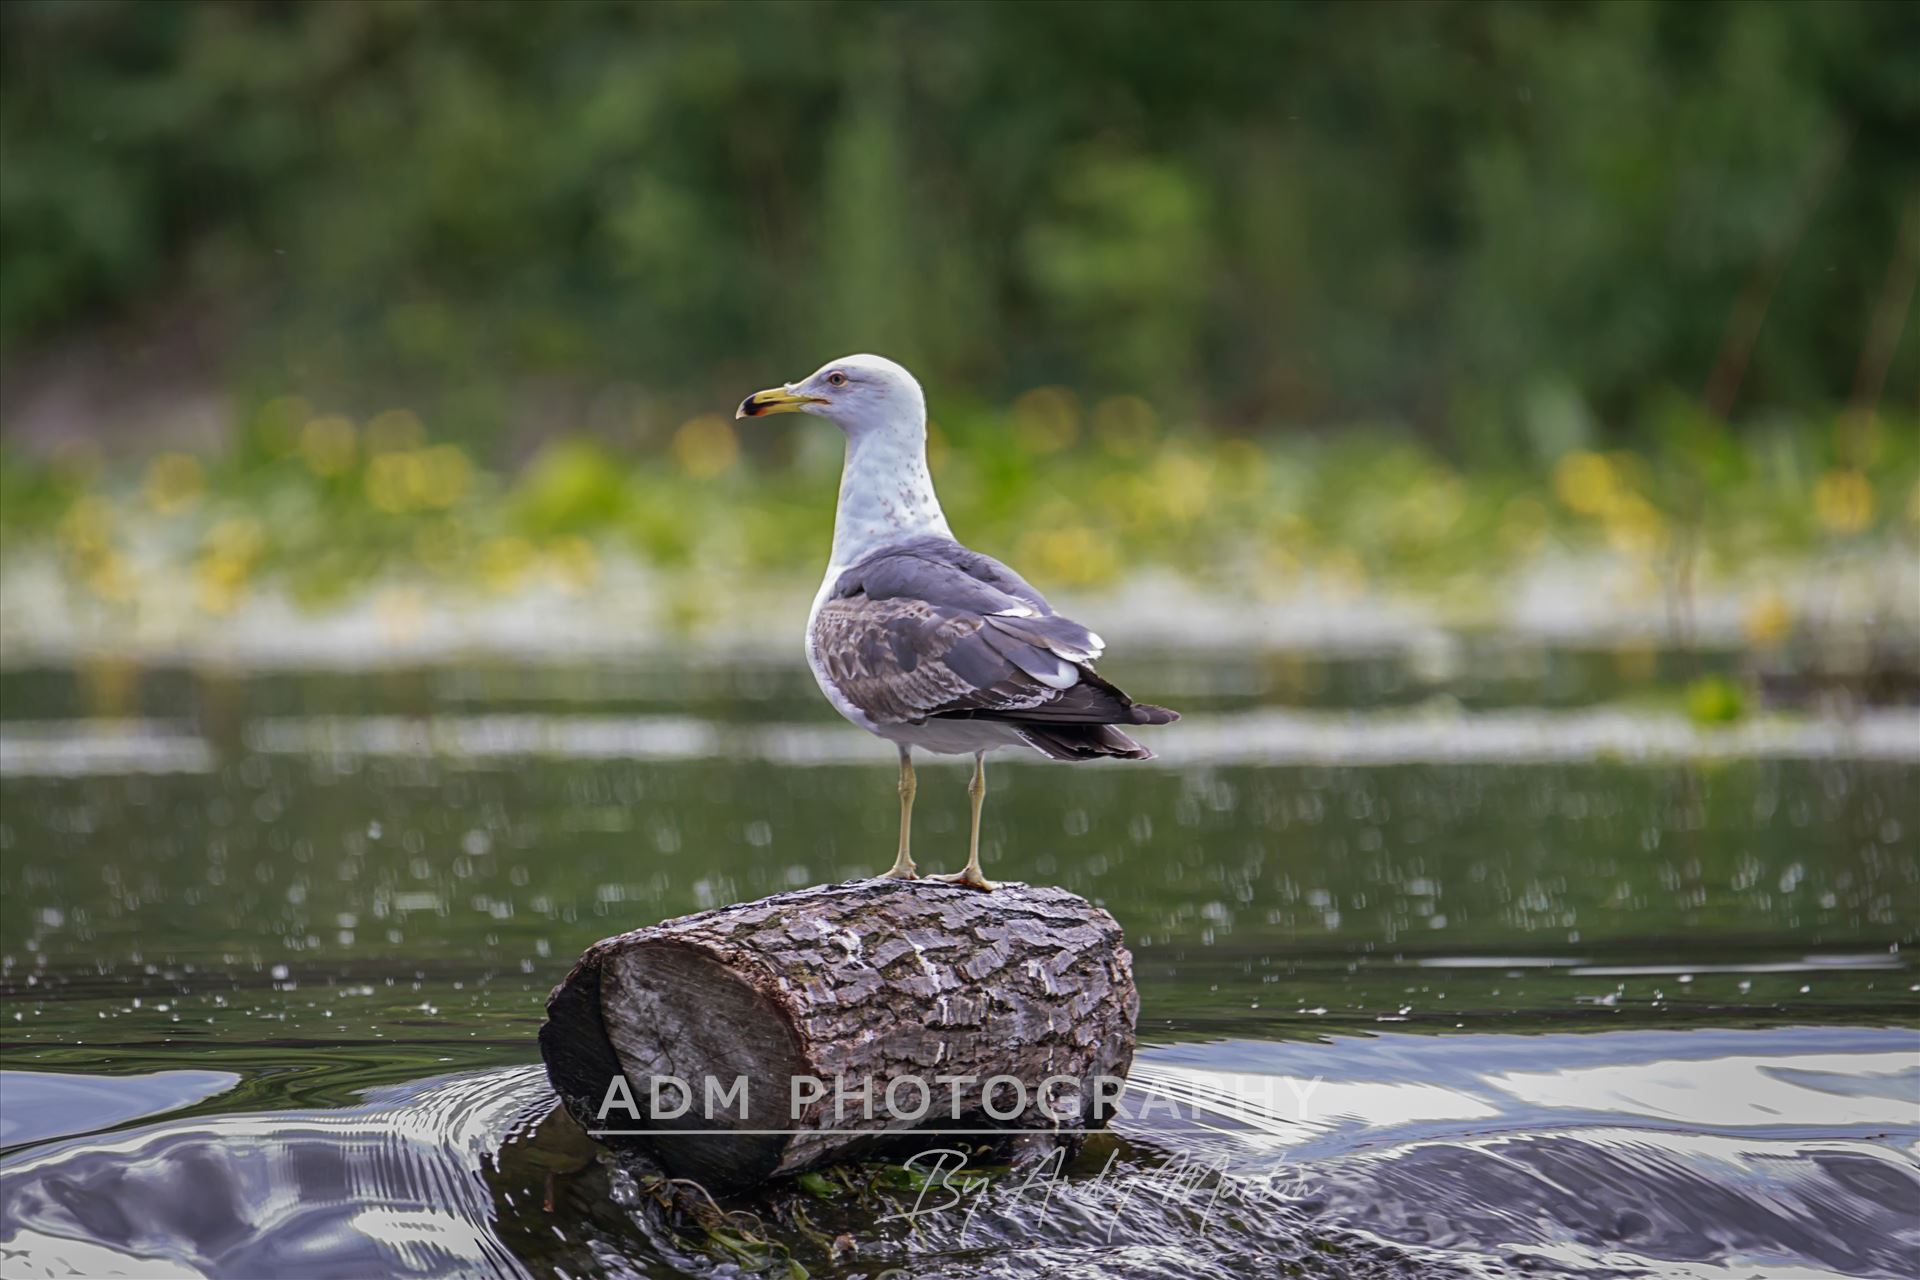 Lesser Black-Backed Gull (Larus Fuscus) The lesser black-backed gull is a large gull that breeds on the Atlantic coasts of Europe. The scientific name is from Latin. Larus appears to have referred to a gull or other large seabird, and fuscus meant black or brown. by Andy Morton Photography